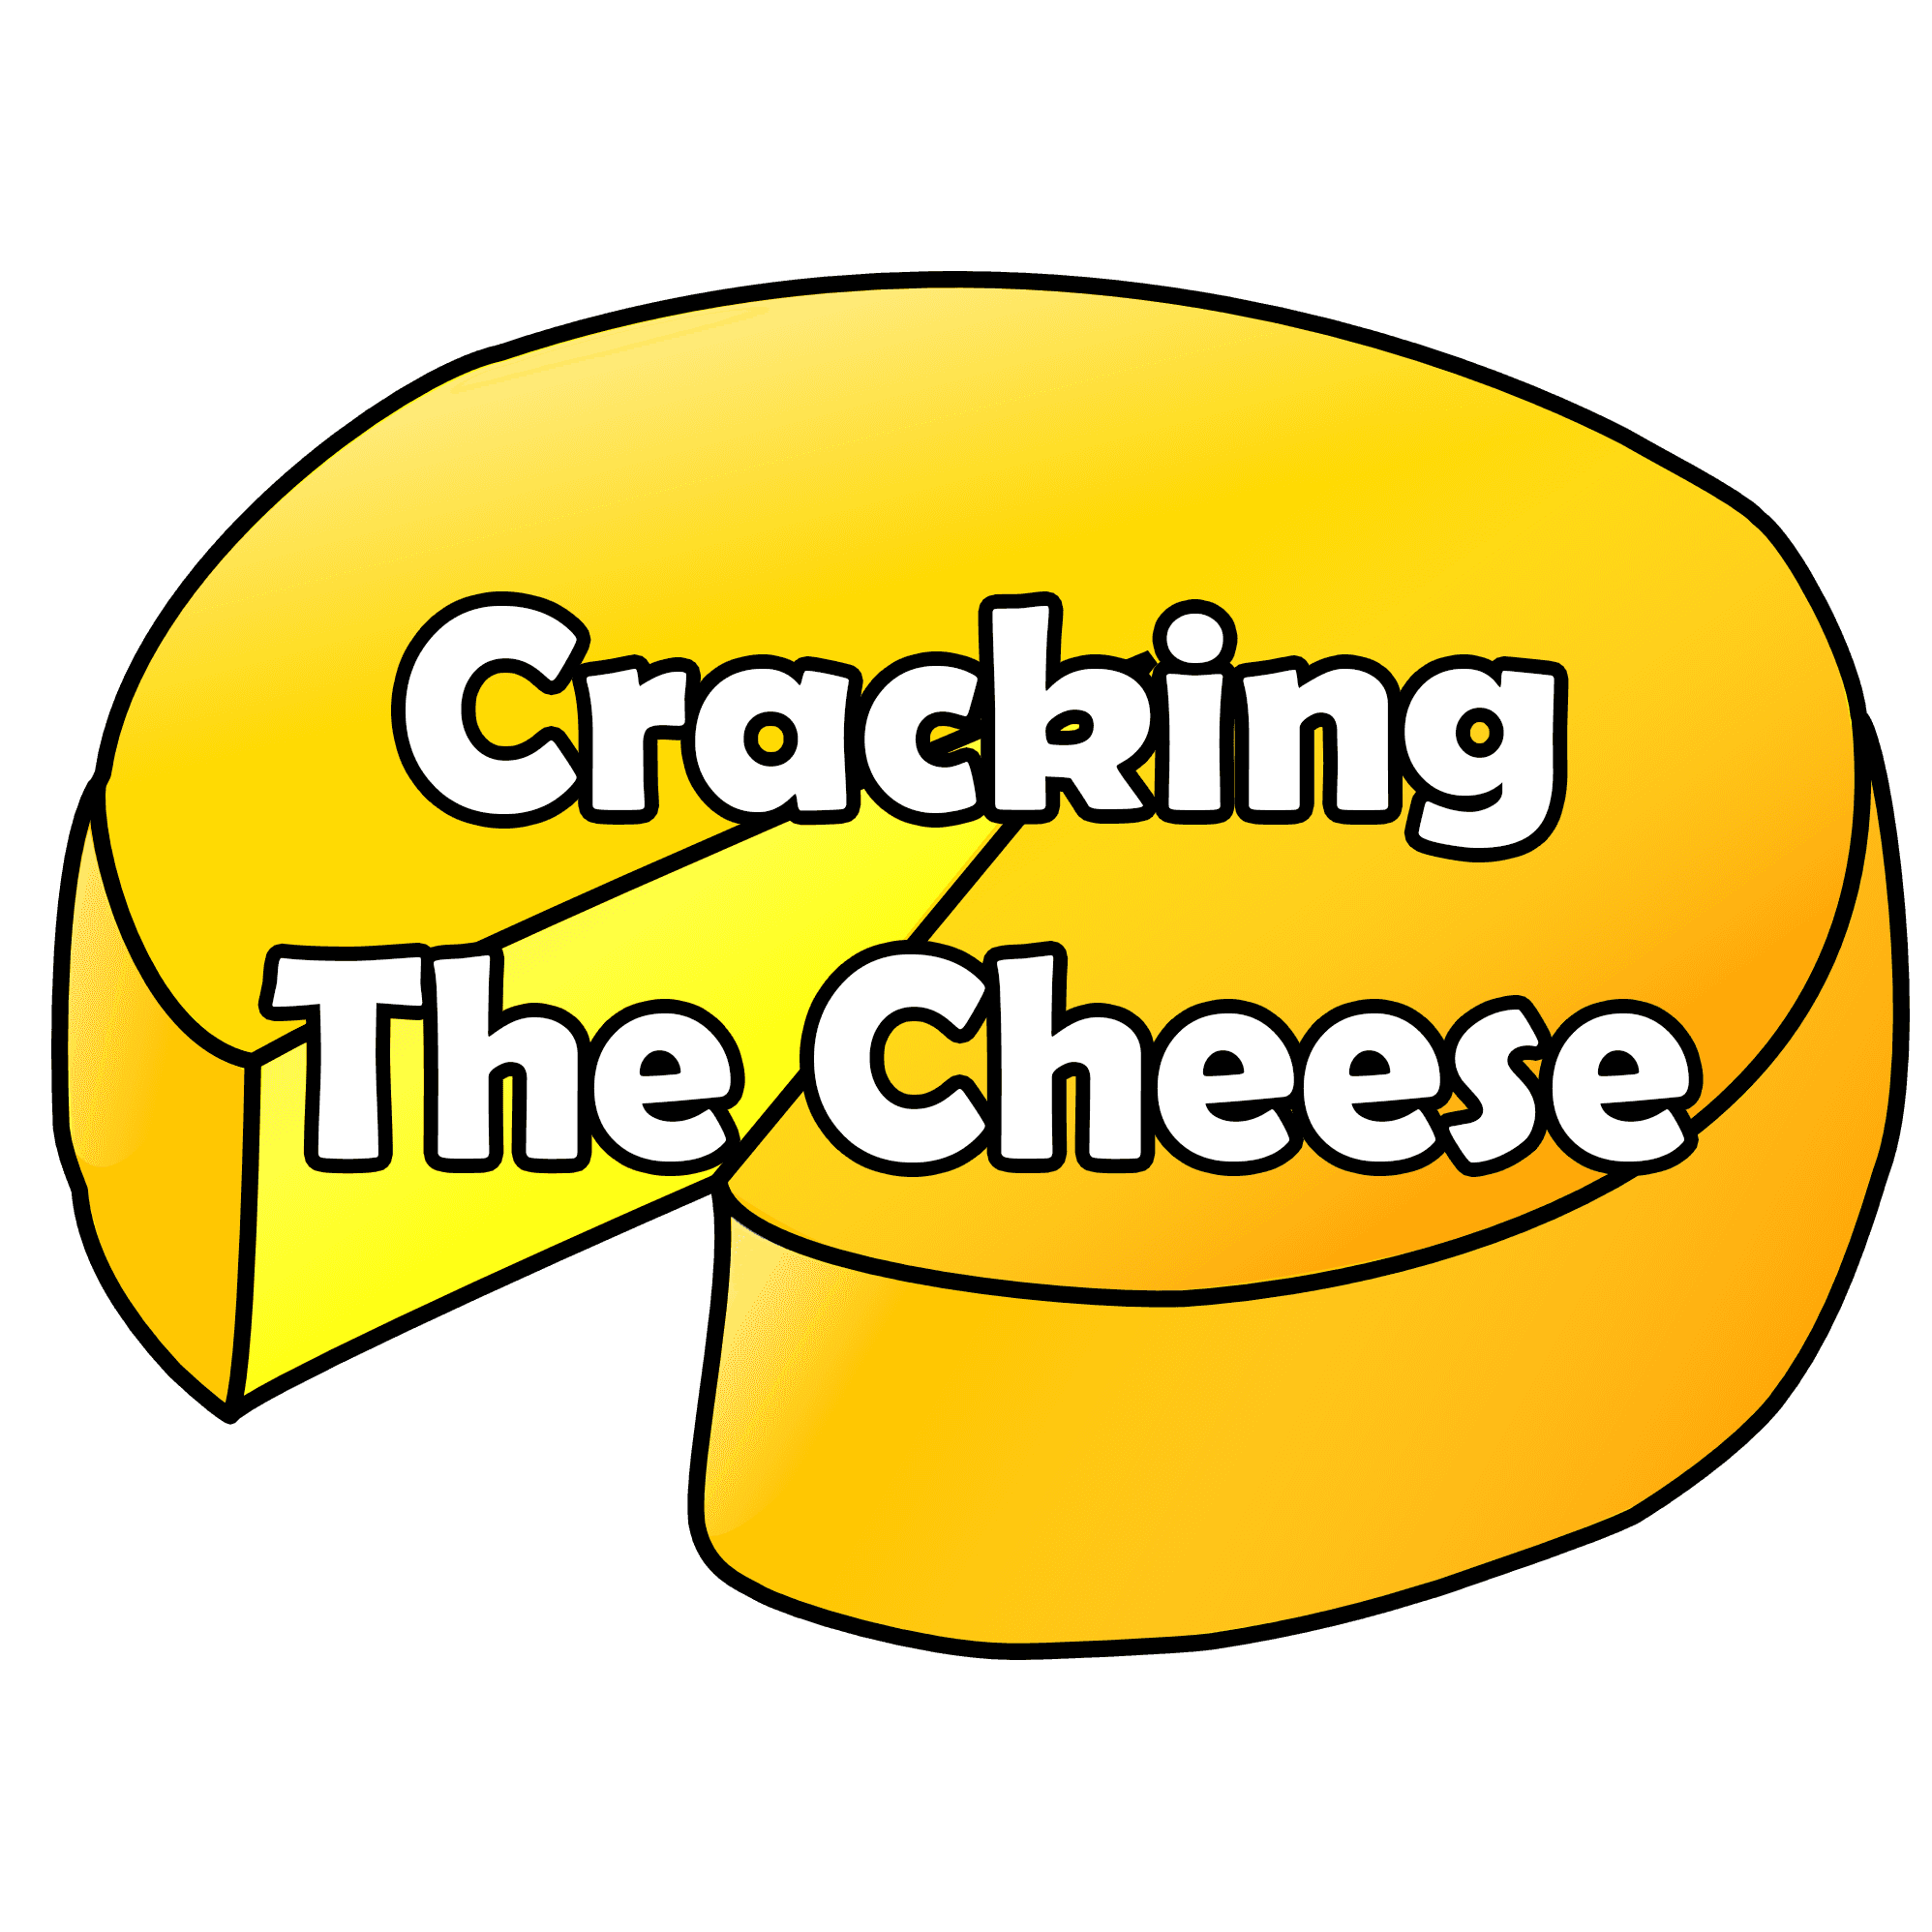 Cracking The Cheese logo